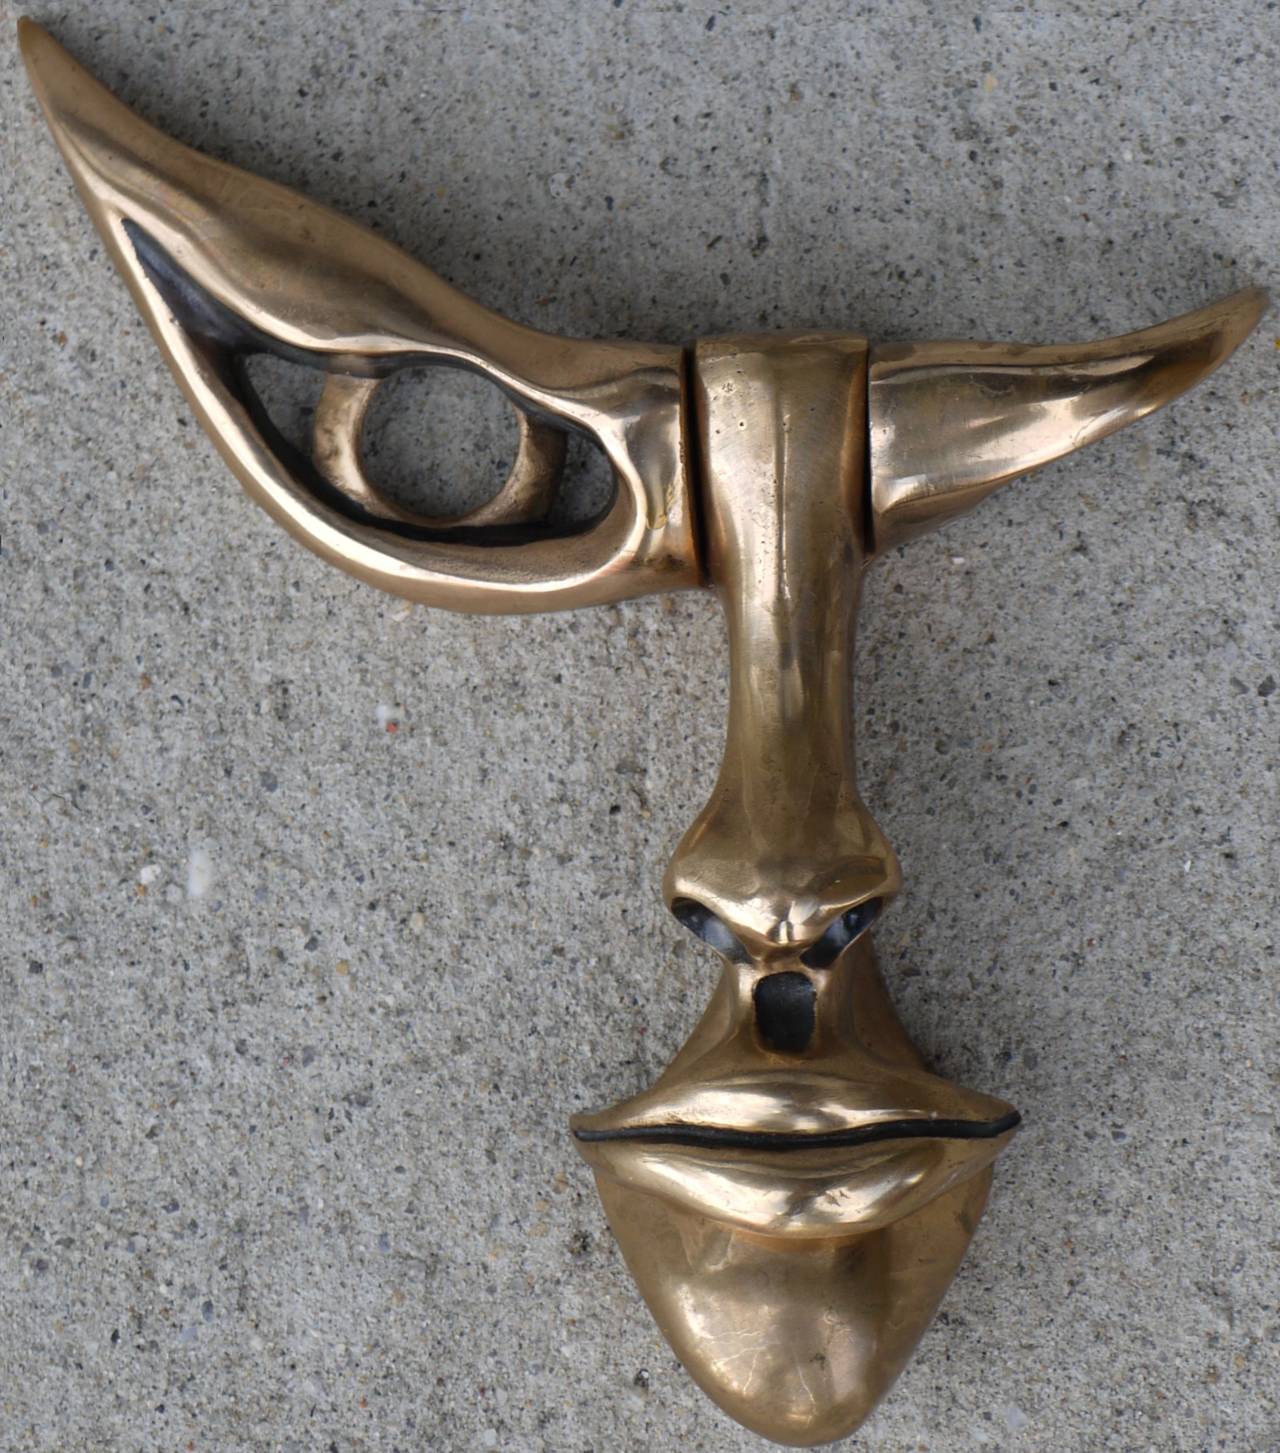 Absolutely stunning bronze door knocker signed, numbered and dated under part that lifts.